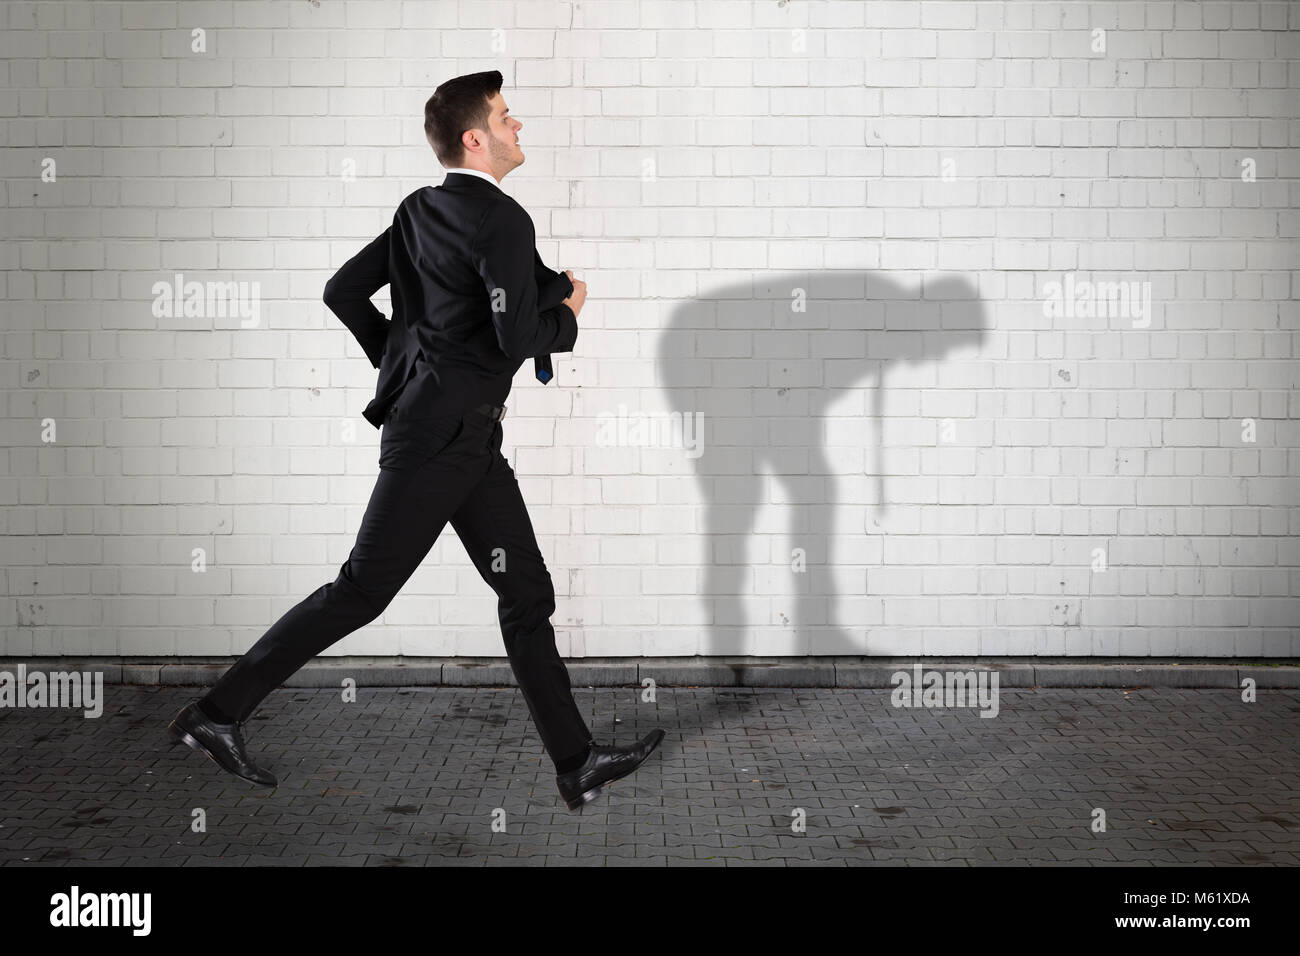 Young Businessman Running On Sidewalk With His Shadow Falling On Wall Stock Photo